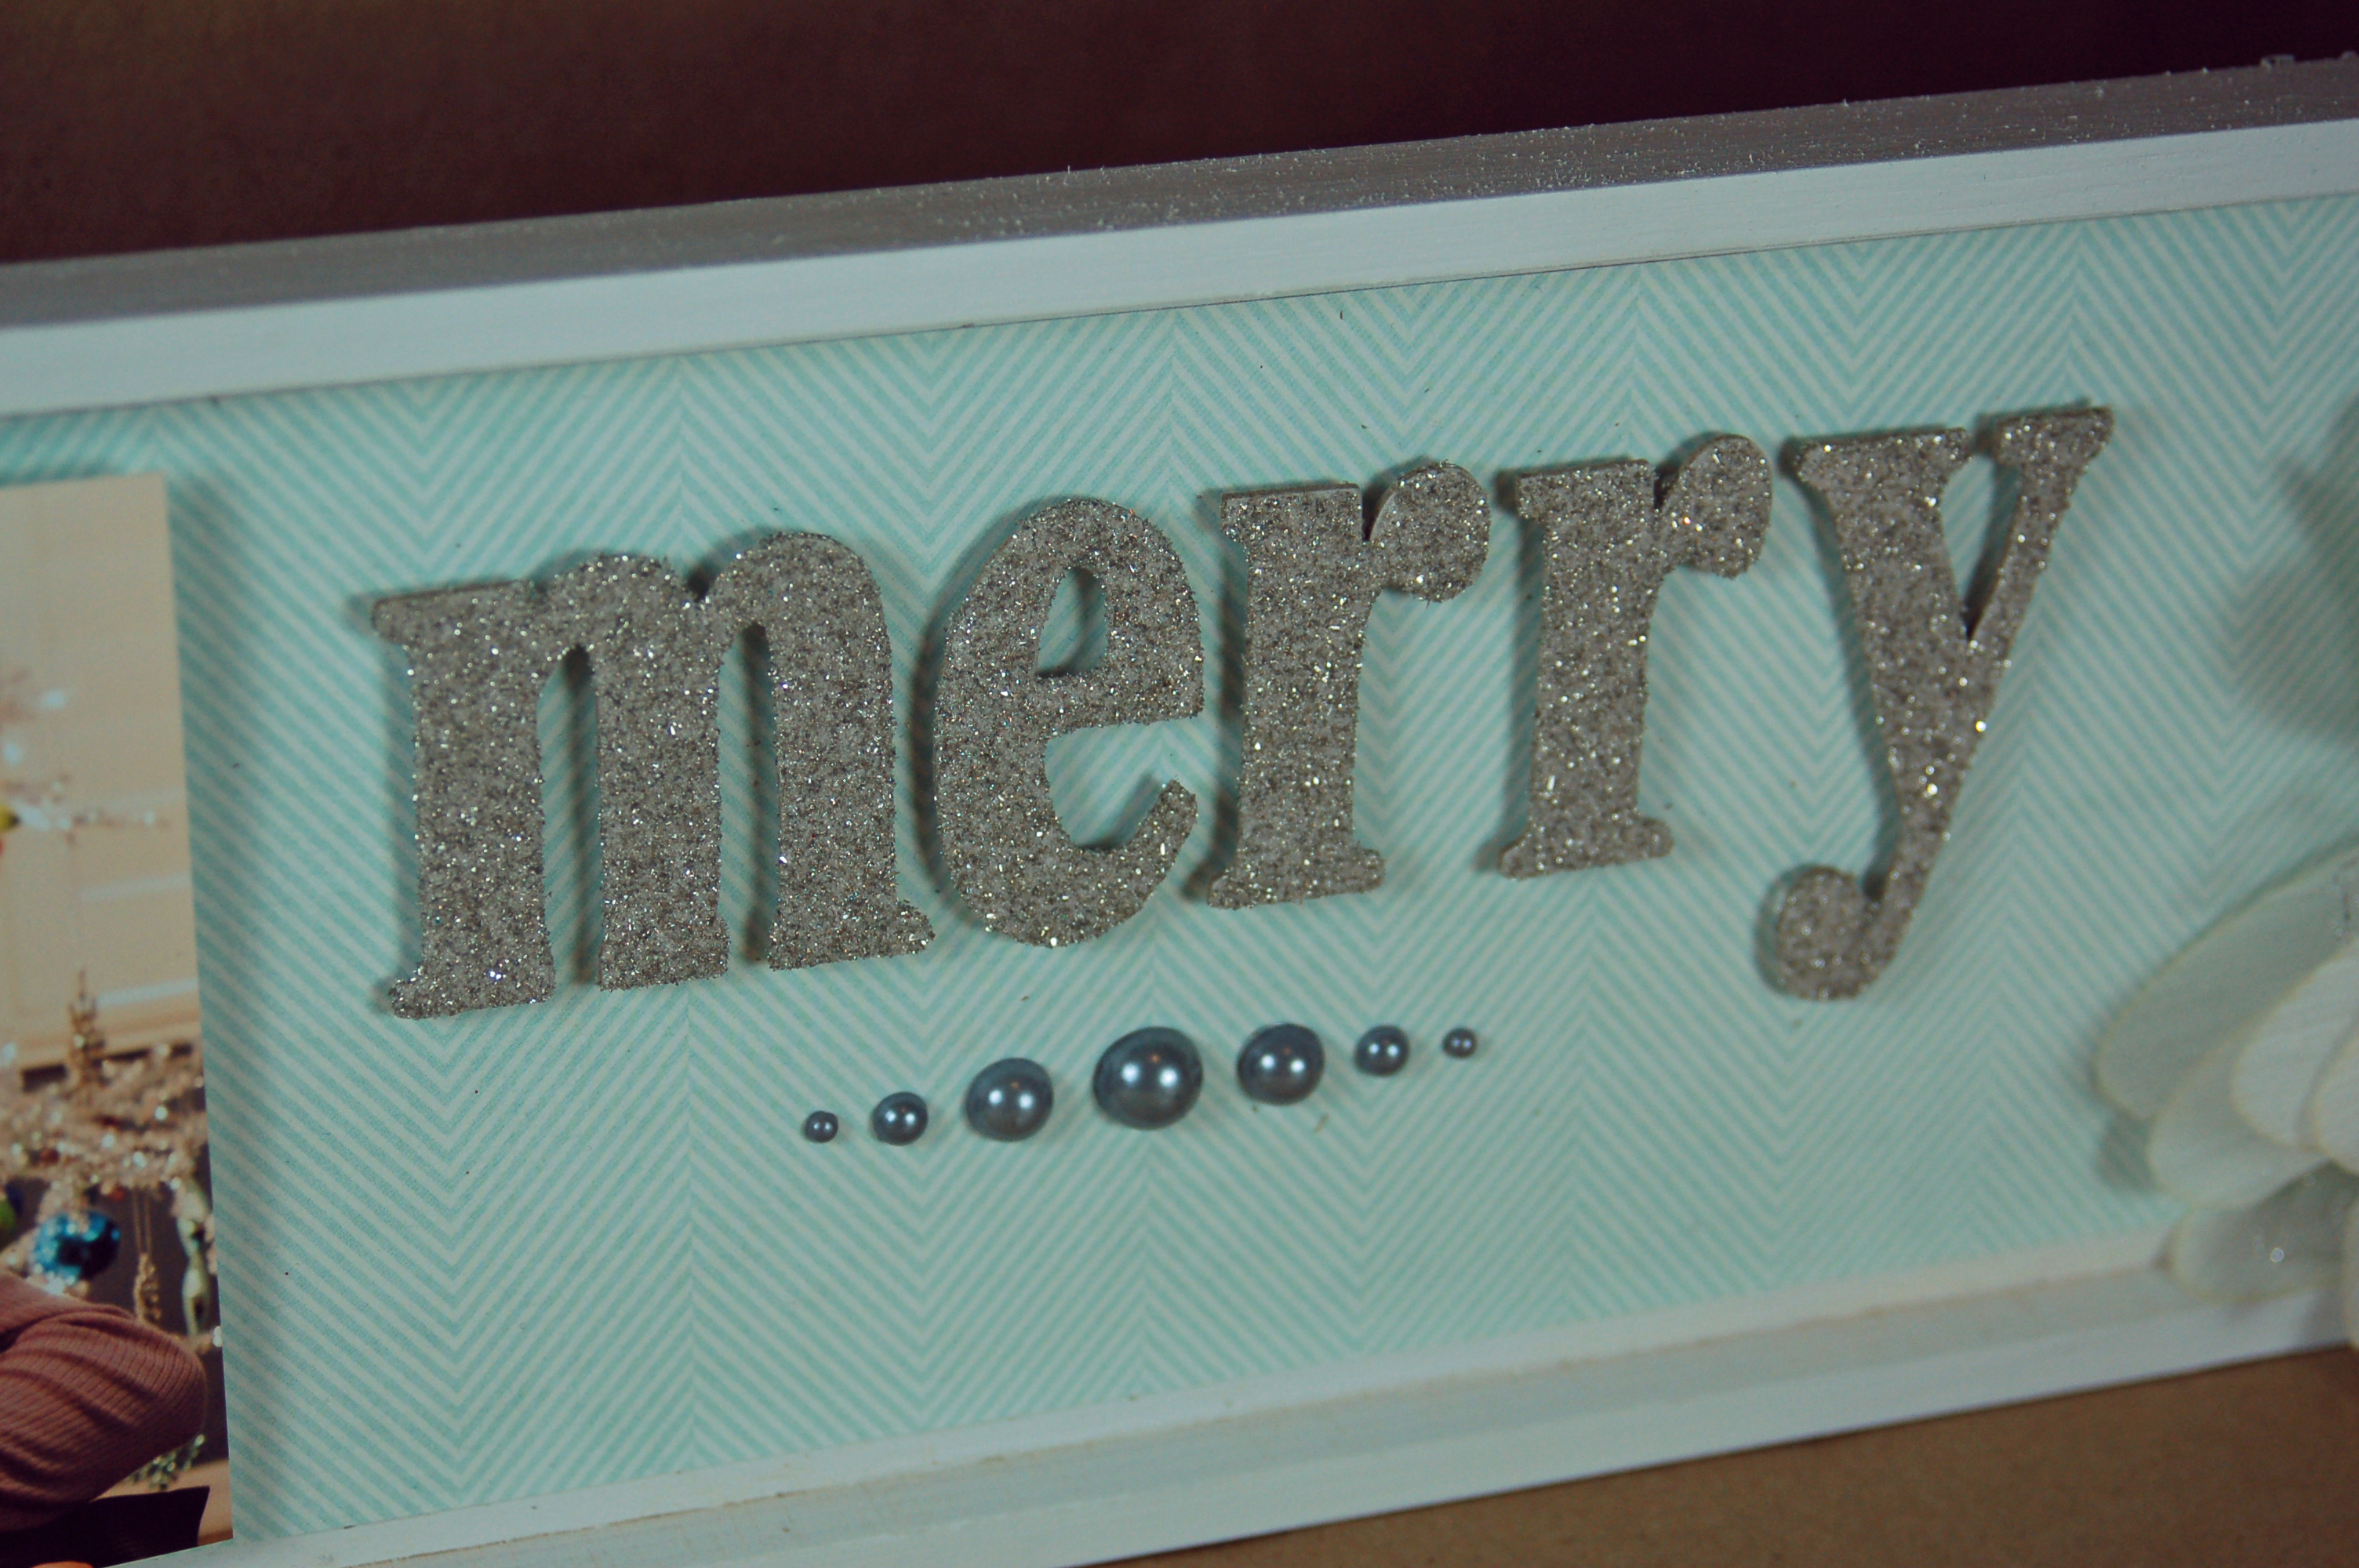 close up of chipboard letters that spell out merry and are covered in silver glass glitter against a soft, light blue patterned paper